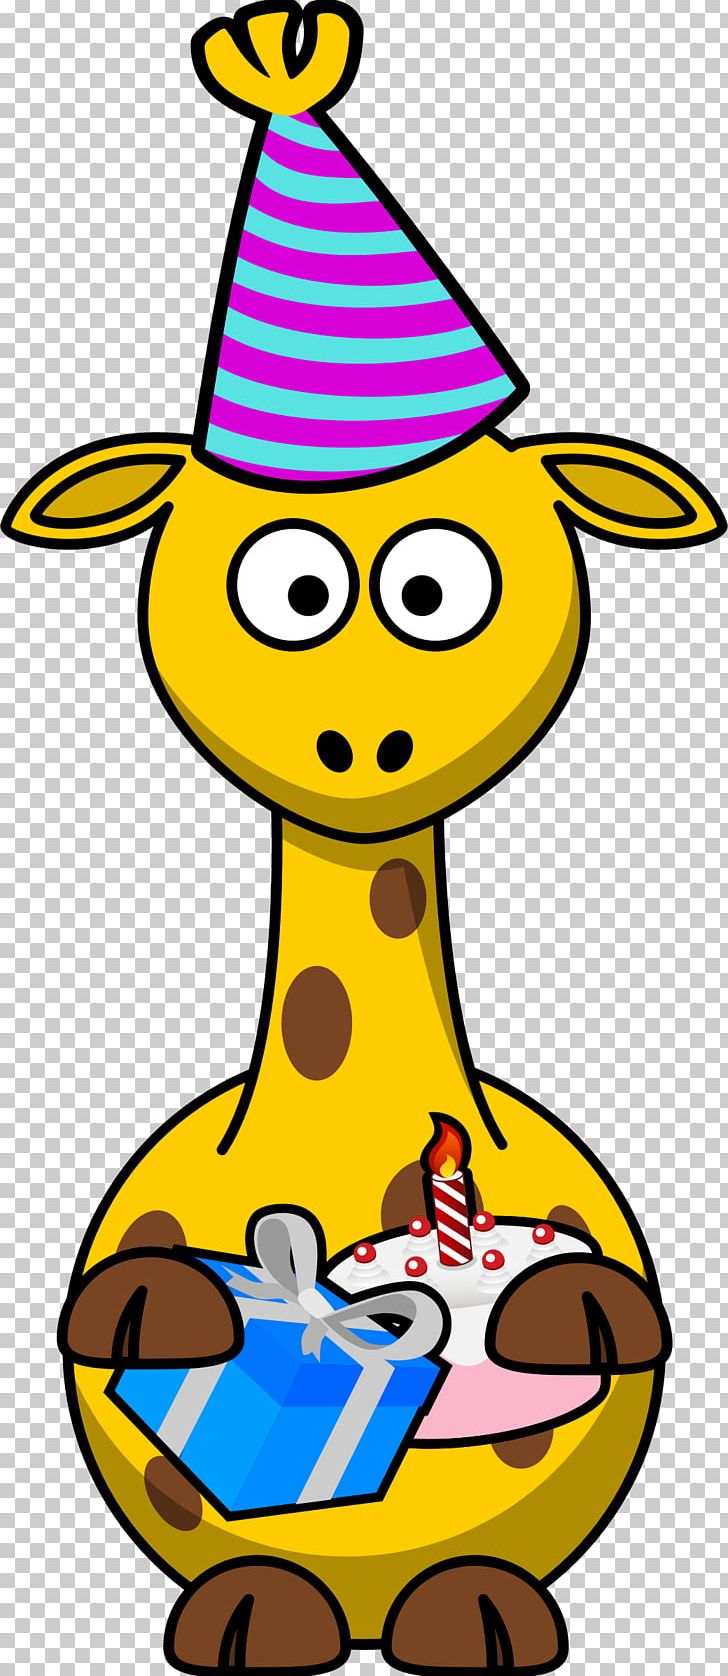 Baby Giraffes PNG, Clipart, Animals, Animation, Art, Artwork, Baby Giraffes Free PNG Download